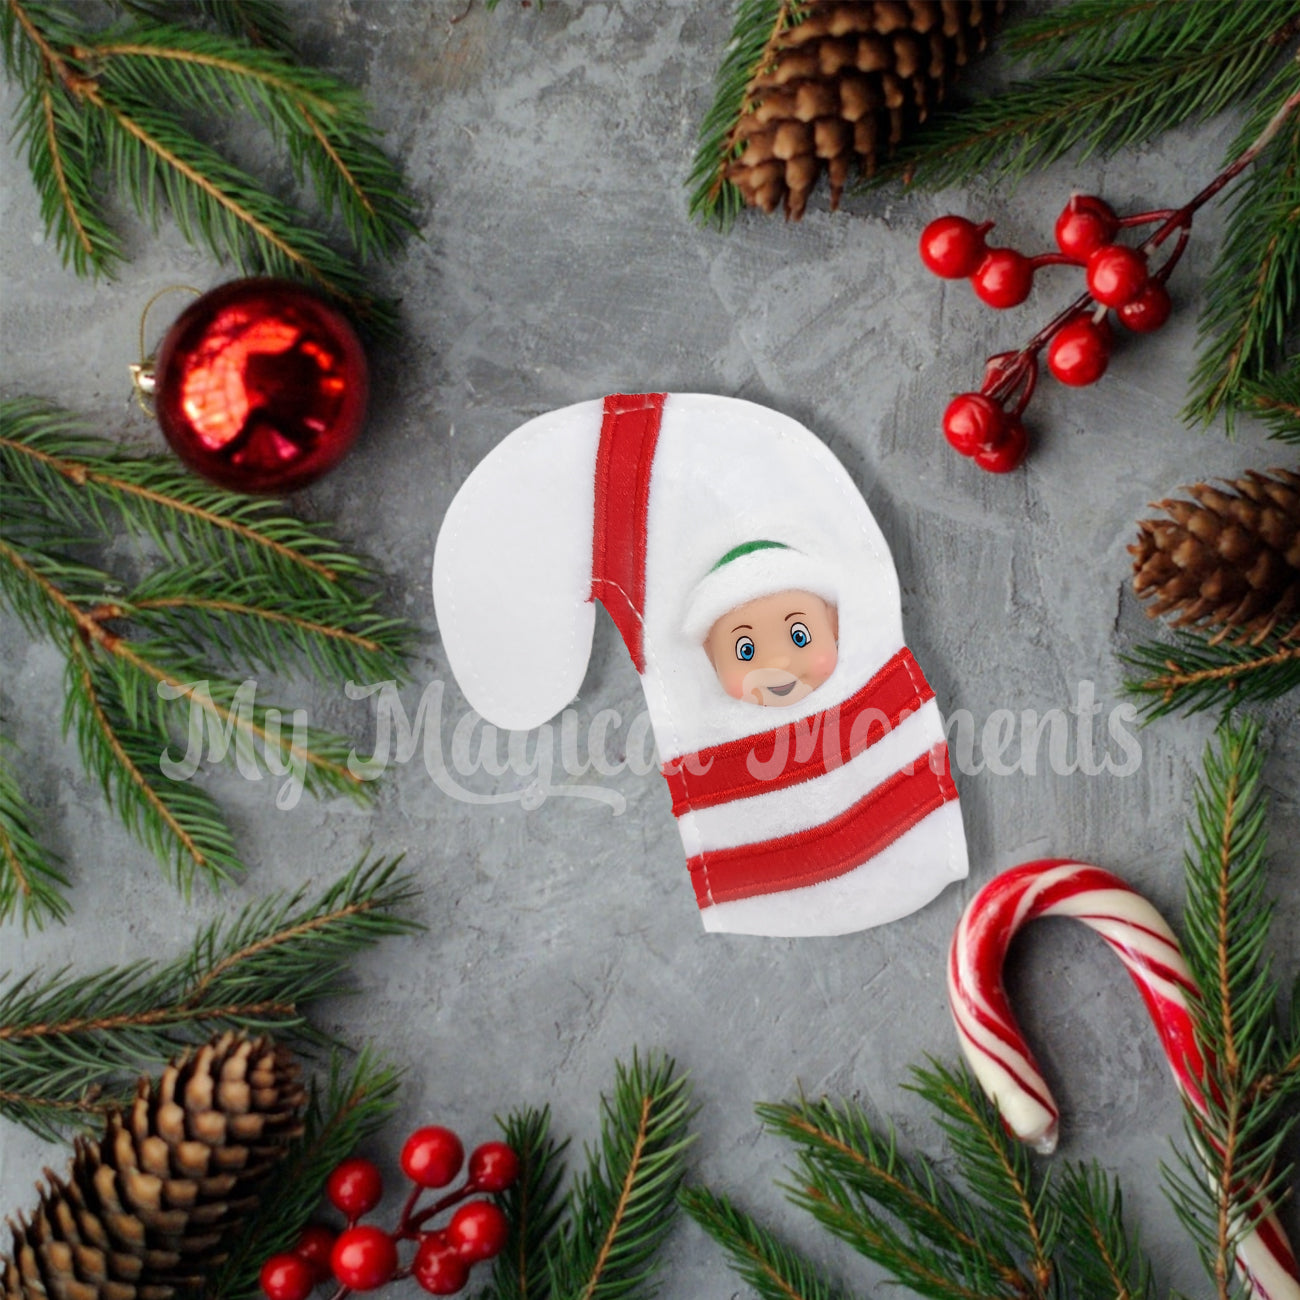 Elf baby wearing a candy cane costume amongst Christmas decor